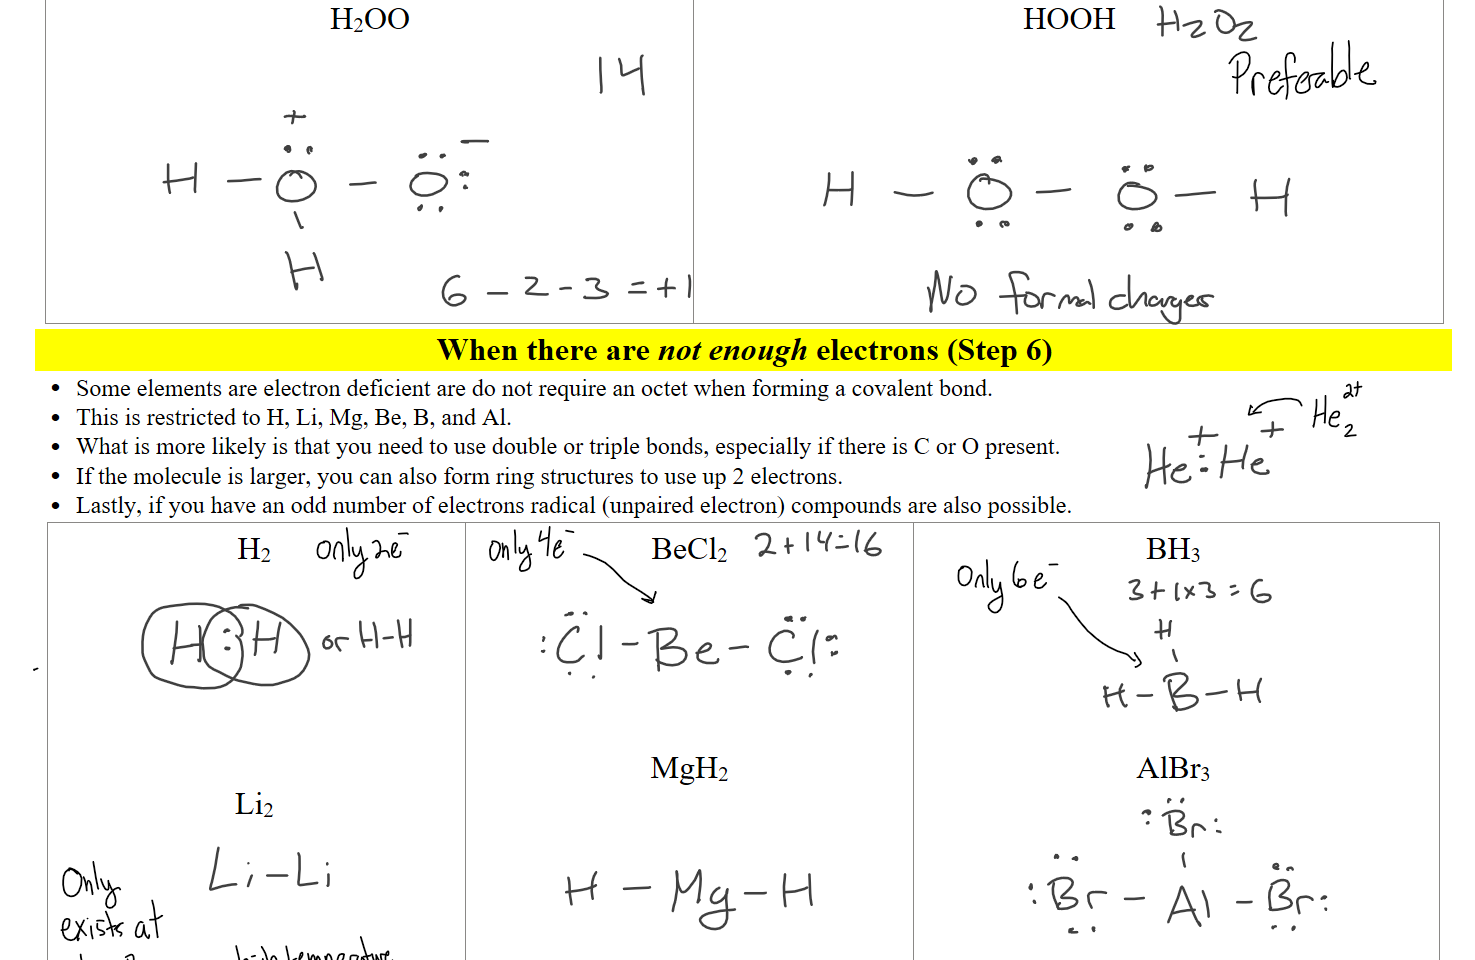 H2OO








HOOH
When there are not enough electrons (Step 6)
Some elements are electron deficient are do not require an octet when forming a covalent bond. 
This is restricted to H, Li, Mg, Be, B, and Al.
What is more likely is that you need to use double or triple bonds, especially if there is C or O present.
If the molecule is larger, you can also form ring structures to use up 2 electrons.
Lastly, if you have an odd number of electrons radical (unpaired electron) compounds are also possible.
H2 






Li2 




BeCl2





MgH2





BH3





AlBr3






Ink Drawings
Ink Drawings
Ink Drawings
Ink Drawings
Ink Drawings
Ink Drawings
Ink Drawings
Ink Drawings
Ink Drawings
Ink Drawings
Ink Drawings
Ink Drawings
Ink Drawings
Ink Drawings
Ink Drawings
Ink Drawings
Ink Drawings
Ink Drawings
Ink Drawings
Ink Drawings
Ink Drawings
Ink Drawings
Ink Drawings
Ink Drawings
Ink Drawings
Ink Drawings
Ink Drawings
Ink Drawings
Ink Drawings
Ink Drawings
Ink Drawings
Ink Drawings
Ink Drawings
Ink Drawings
Ink Drawings
Ink Drawings
Ink Drawings
Ink Drawings
Ink Drawings
Ink Drawings
Ink Drawings
Ink Drawings
Ink Drawings
Ink Drawings
Ink Drawings
Ink Drawings
Ink Drawings
Ink Drawings
Ink Drawings
Ink Drawings
Ink Drawings
Ink Drawings
Ink Drawings
Ink Drawings
Ink Drawings
Ink Drawings
Ink Drawings
Ink Drawings
Ink Drawings
Ink Drawings
Ink Drawings
Ink Drawings
Ink Drawings
Ink Drawings
Ink Drawings
Ink Drawings
Ink Drawings
Ink Drawings
Ink Drawings
Ink Drawings
Ink Drawings
Ink Drawings
Ink Drawings
Ink Drawings
Ink Drawings
Ink Drawings
Ink Drawings
Ink Drawings
Ink Drawings
Ink Drawings
Ink Drawings
Ink Drawings
Ink Drawings
Ink Drawings
Ink Drawings
Ink Drawings
Ink Drawings
Ink Drawings
Ink Drawings
Ink Drawings
Ink Drawings
Ink Drawings
Ink Drawings
Ink Drawings
Ink Drawings
Ink Drawings
Ink Drawings
Ink Drawings
Ink Drawings
Ink Drawings
Ink Drawings
Ink Drawings
Ink Drawings
Ink Drawings
Ink Drawings
Ink Drawings
Ink Drawings
Ink Drawings
Ink Drawings
Ink Drawings
Ink Drawings
Ink Drawings
Ink Drawings
Ink Drawings
Ink Drawings
Ink Drawings
Ink Drawings
Ink Drawings
Ink Drawings
Ink Drawings
Ink Drawings
Ink Drawings
Ink Drawings
Ink Drawings
Ink Drawings
Ink Drawings
Ink Drawings
Ink Drawings
Ink Drawings
Ink Drawings
Ink Drawings
Ink Drawings
Ink Drawings
Ink Drawings
Ink Drawings
Ink Drawings
Ink Drawings
Ink Drawings
Ink Drawings
Ink Drawings
Ink Drawings
Ink Drawings
Ink Drawings
Ink Drawings
Ink Drawings
Ink Drawings
Ink Drawings
Ink Drawings
Ink Drawings
Ink Drawings
Ink Drawings
Ink Drawings
Ink Drawings
Ink Drawings
Ink Drawings
Ink Drawings
Ink Drawings
Ink Drawings
Ink Drawings
Ink Drawings
Ink Drawings
Ink Drawings
Ink Drawings
Ink Drawings
Ink Drawings
Ink Drawings
Ink Drawings
Ink Drawings
Ink Drawings
Ink Drawings
Ink Drawings
Ink Drawings
Ink Drawings
Ink Drawings
Ink Drawings
Ink Drawings
Ink Drawings
Ink Drawings
Ink Drawings
Ink Drawings
Ink Drawings
Ink Drawings
Ink Drawings
Ink Drawings
Ink Drawings
Ink Drawings
Ink Drawings
Ink Drawings
Ink Drawings
Ink Drawings
Ink Drawings
Ink Drawings
Ink Drawings
Ink Drawings
Ink Drawings
Ink Drawings
Ink Drawings
Ink Drawings
Ink Drawings
Ink Drawings
Ink Drawings
Ink Drawings
Ink Drawings
Ink Drawings
Ink Drawings
Ink Drawings
Ink Drawings
Ink Drawings
Ink Drawings
Ink Drawings
Ink Drawings
Ink Drawings
Ink Drawings
Ink Drawings
Ink Drawings
Ink Drawings
Ink Drawings
Ink Drawings
Ink Drawings
Ink Drawings
Ink Drawings
Ink Drawings
Ink Drawings
Ink Drawings
Ink Drawings
Ink Drawings
Ink Drawings
Ink Drawings
Ink Drawings
Ink Drawings
Ink Drawings
Ink Drawings
Ink Drawings
Ink Drawings
Ink Drawings
Ink Drawings
Ink Drawings
Ink Drawings
Ink Drawings
Ink Drawings
Ink Drawings
Ink Drawings
Ink Drawings
Ink Drawings
Ink Drawings
Ink Drawings
Ink Drawings
Ink Drawings
Ink Drawings
Ink Drawings
Ink Drawings
Ink Drawings
Ink Drawings
Ink Drawings
Ink Drawings
Ink Drawings
Ink Drawings
Ink Drawings
Ink Drawings
Ink Drawings
Ink Drawings
Ink Drawings
Ink Drawings
Ink Drawings
Ink Drawings
Ink Drawings
Ink Drawings
Ink Drawings
Ink Drawings
Ink Drawings
Ink Drawings
Ink Drawings
Ink Drawings
Ink Drawings
Ink Drawings
Ink Drawings
Ink Drawings
Ink Drawings
Ink Drawings
Ink Drawings
Ink Drawings
Ink Drawings
Ink Drawings
Ink Drawings
Ink Drawings
Ink Drawings
Ink Drawings
Ink Drawings
Ink Drawings
Ink Drawings
Ink Drawings
Ink Drawings
Ink Drawings
Ink Drawings
Ink Drawings
Ink Drawings
Ink Drawings
Ink Drawings
Ink Drawings
Ink Drawings
Ink Drawings
Ink Drawings
Ink Drawings
Ink Drawings
Ink Drawings
Ink Drawings
Ink Drawings
Ink Drawings
Ink Drawings
Ink Drawings
Ink Drawings
Ink Drawings
Ink Drawings
Ink Drawings
Ink Drawings
Ink Drawings
Ink Drawings
Ink Drawings
Ink Drawings
